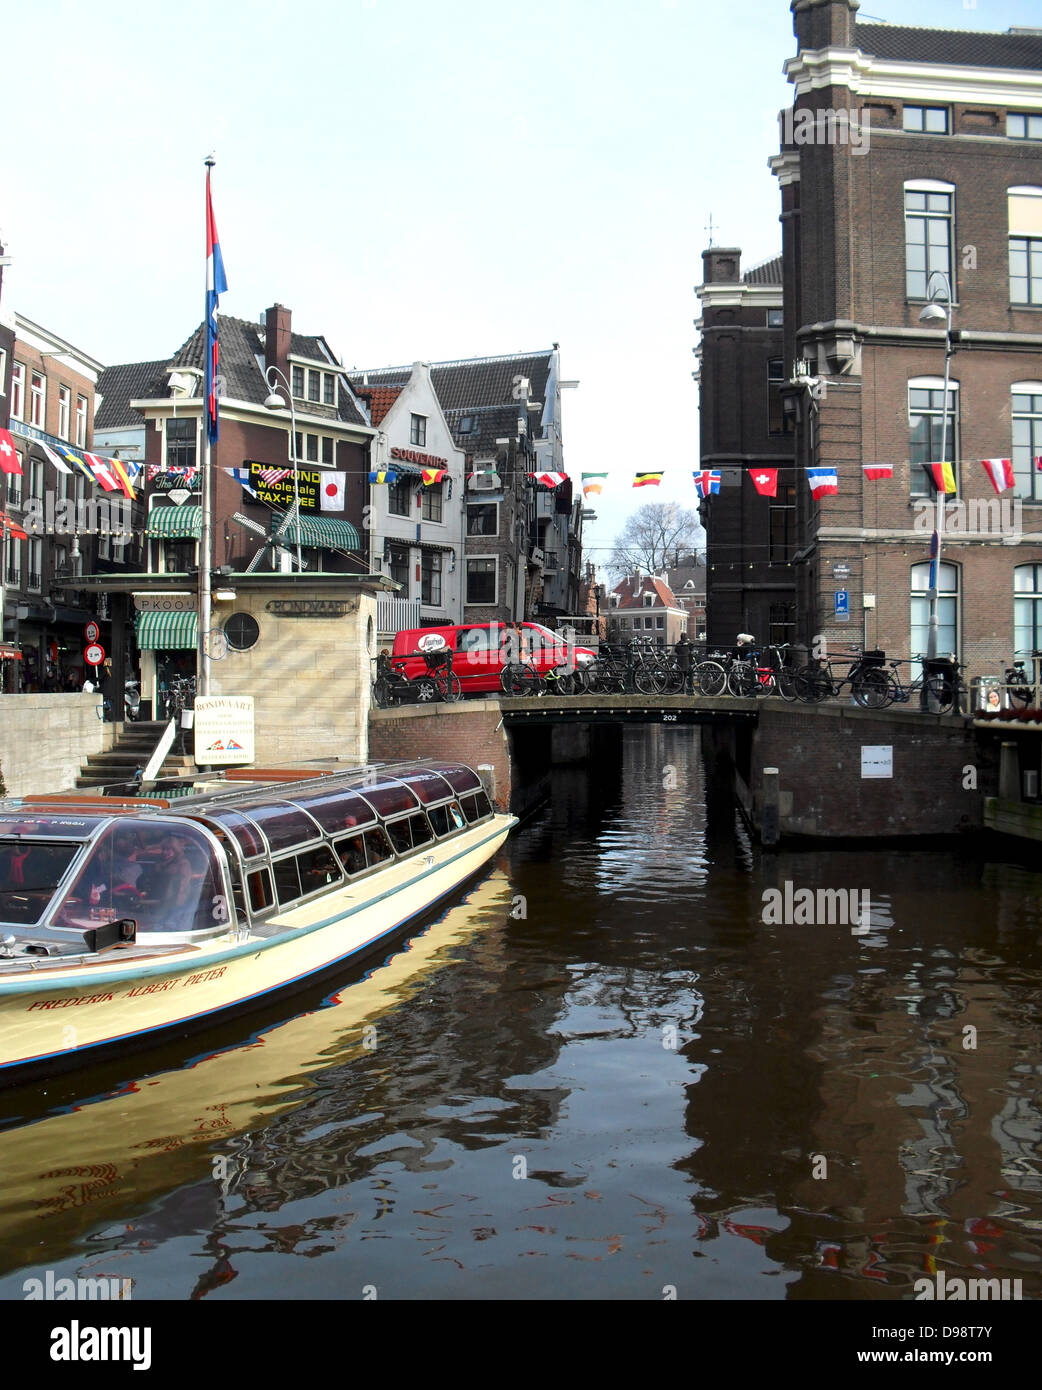 Typical canal street scene in Amsterdam, Holland Stock Photo